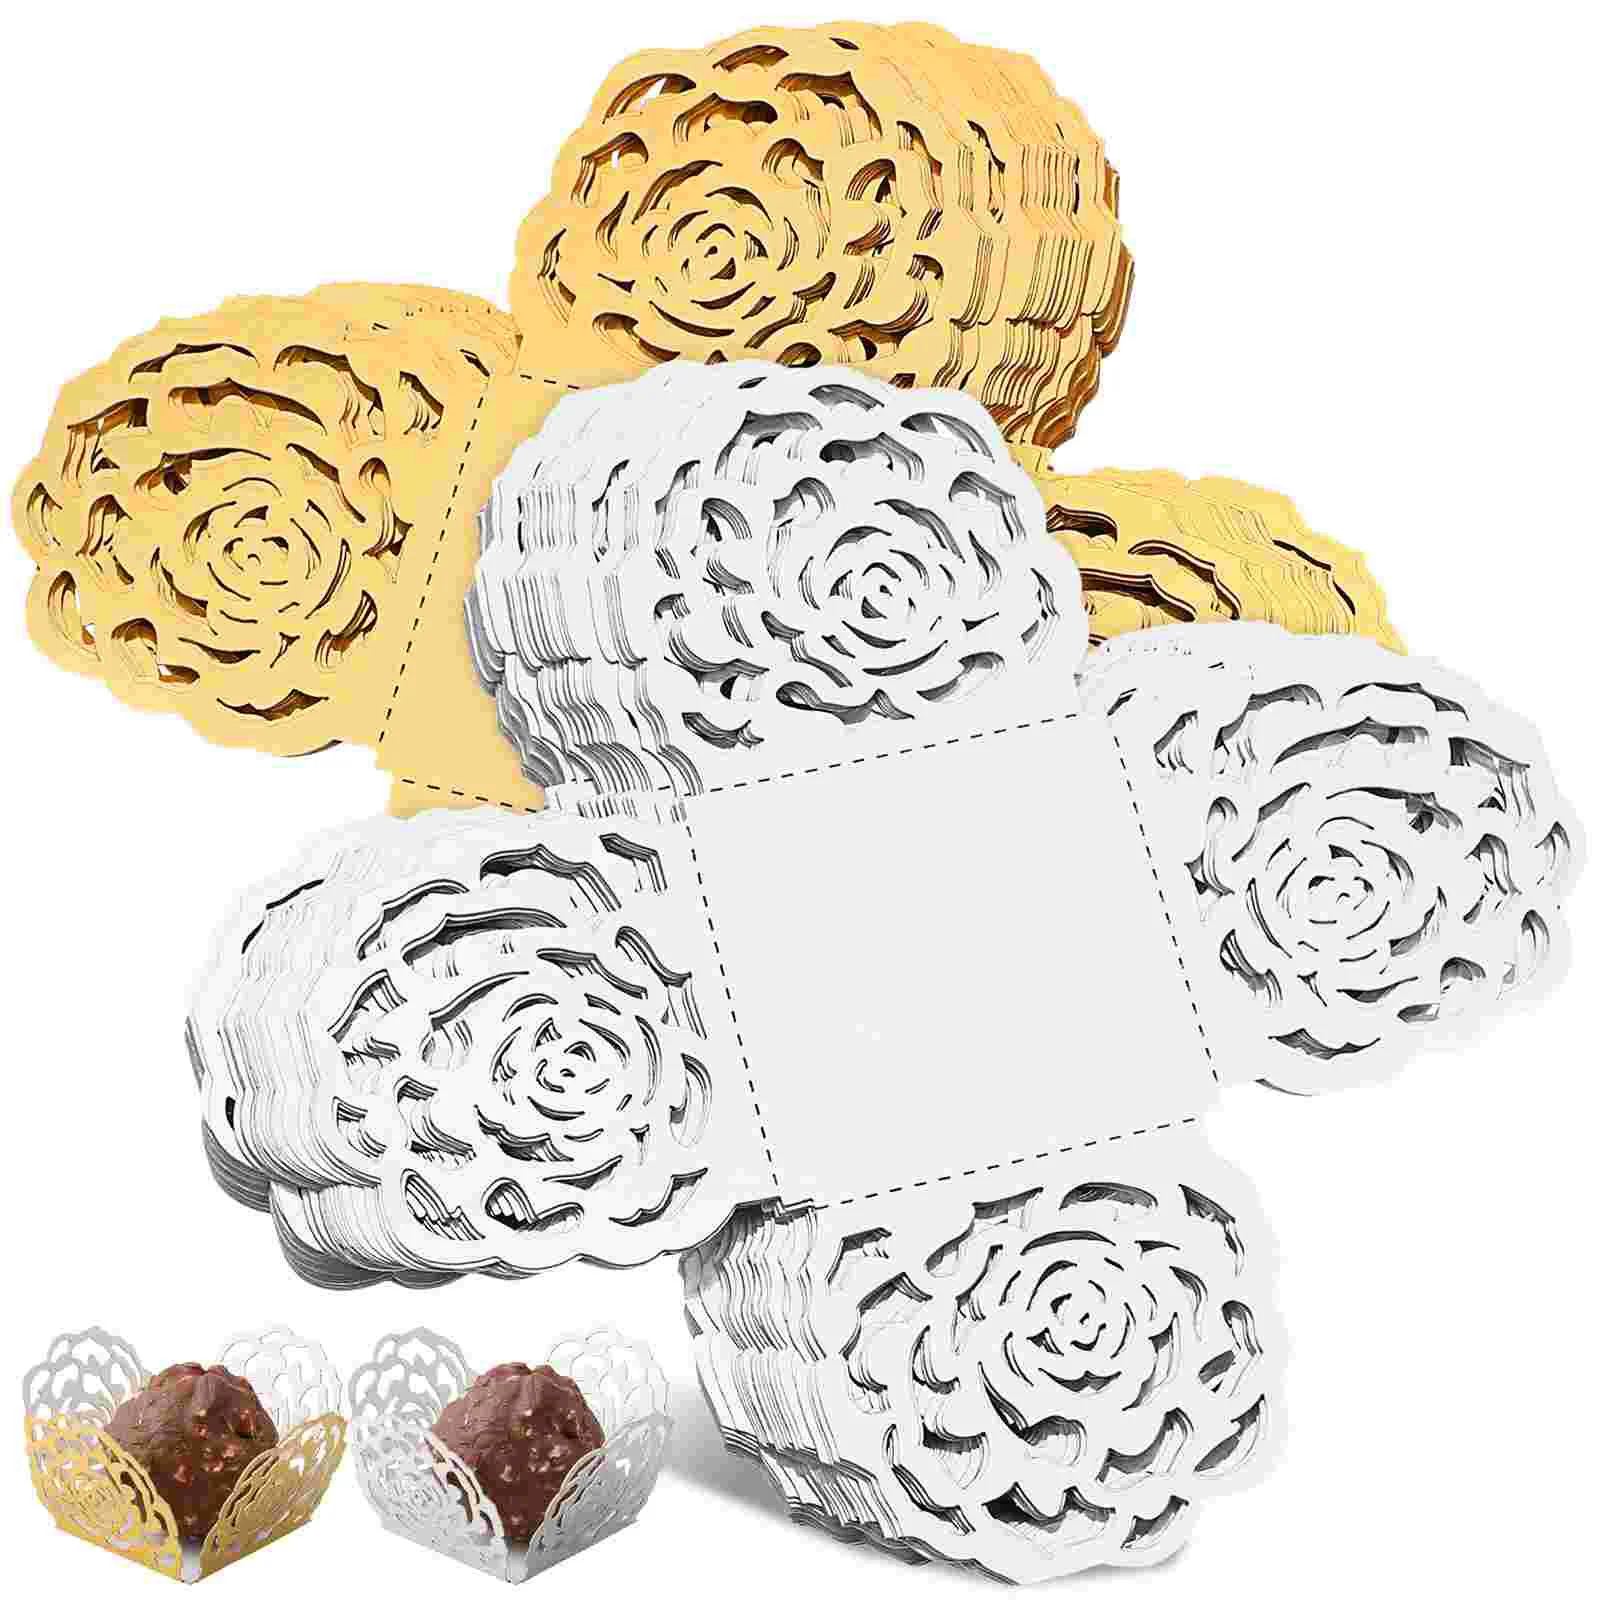 

100 Pcs Wedding Ceremony Decorations Cake Wrapper Dessert Wrapping Cup Hollow Out Cupcake Paper Truffle Chocolate Liners